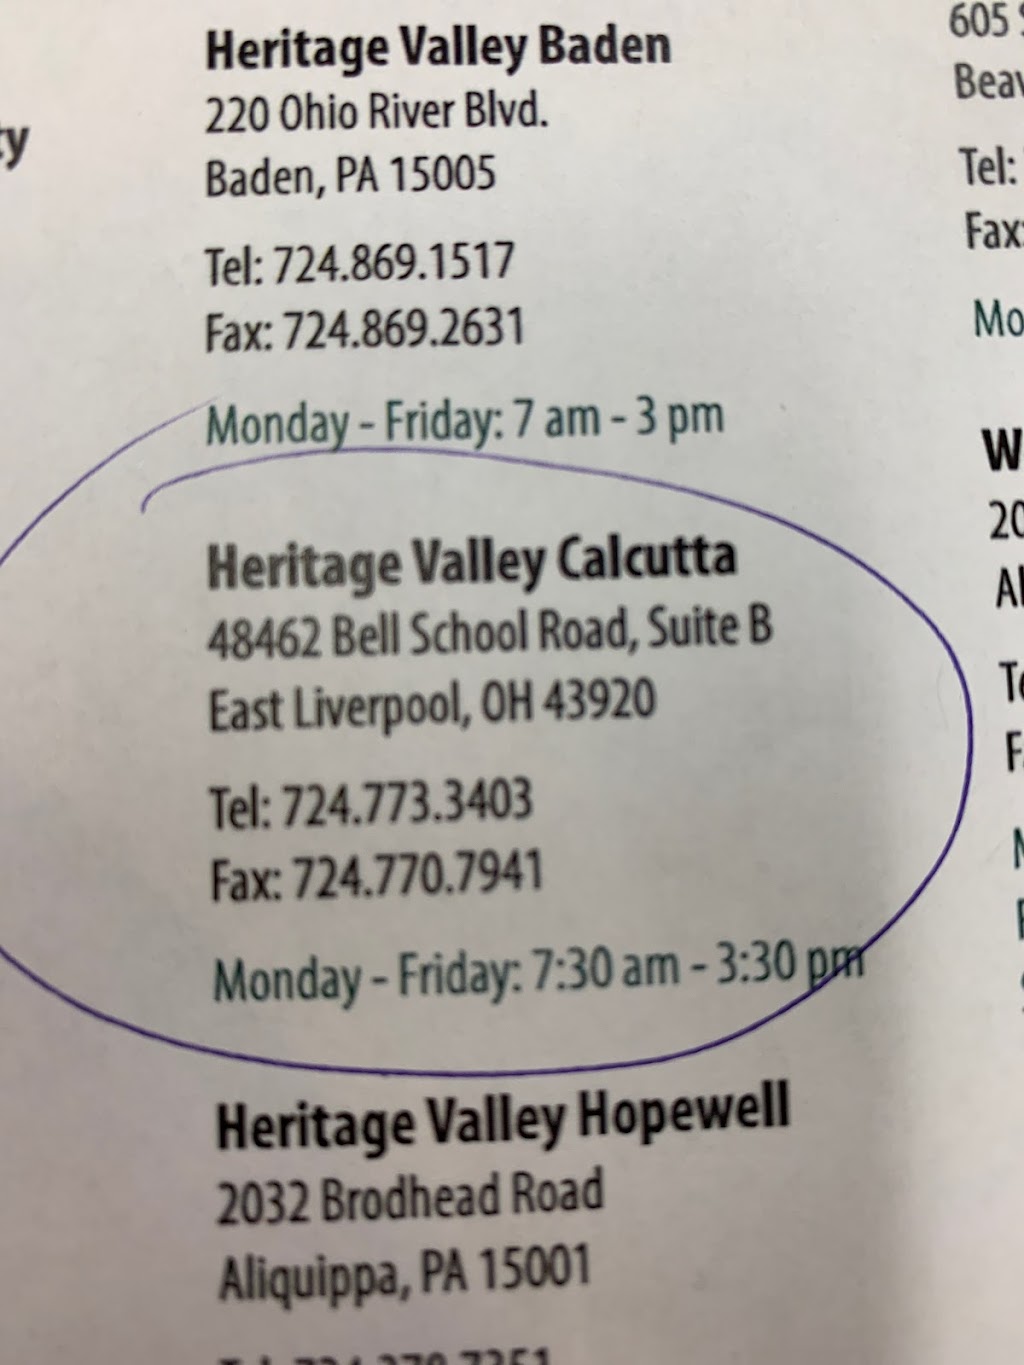 Heritage Valley Calcutta Imaging & Lab | 48462 Bell School Rd # B, East Liverpool, OH 43920 | Phone: (724) 773-3403